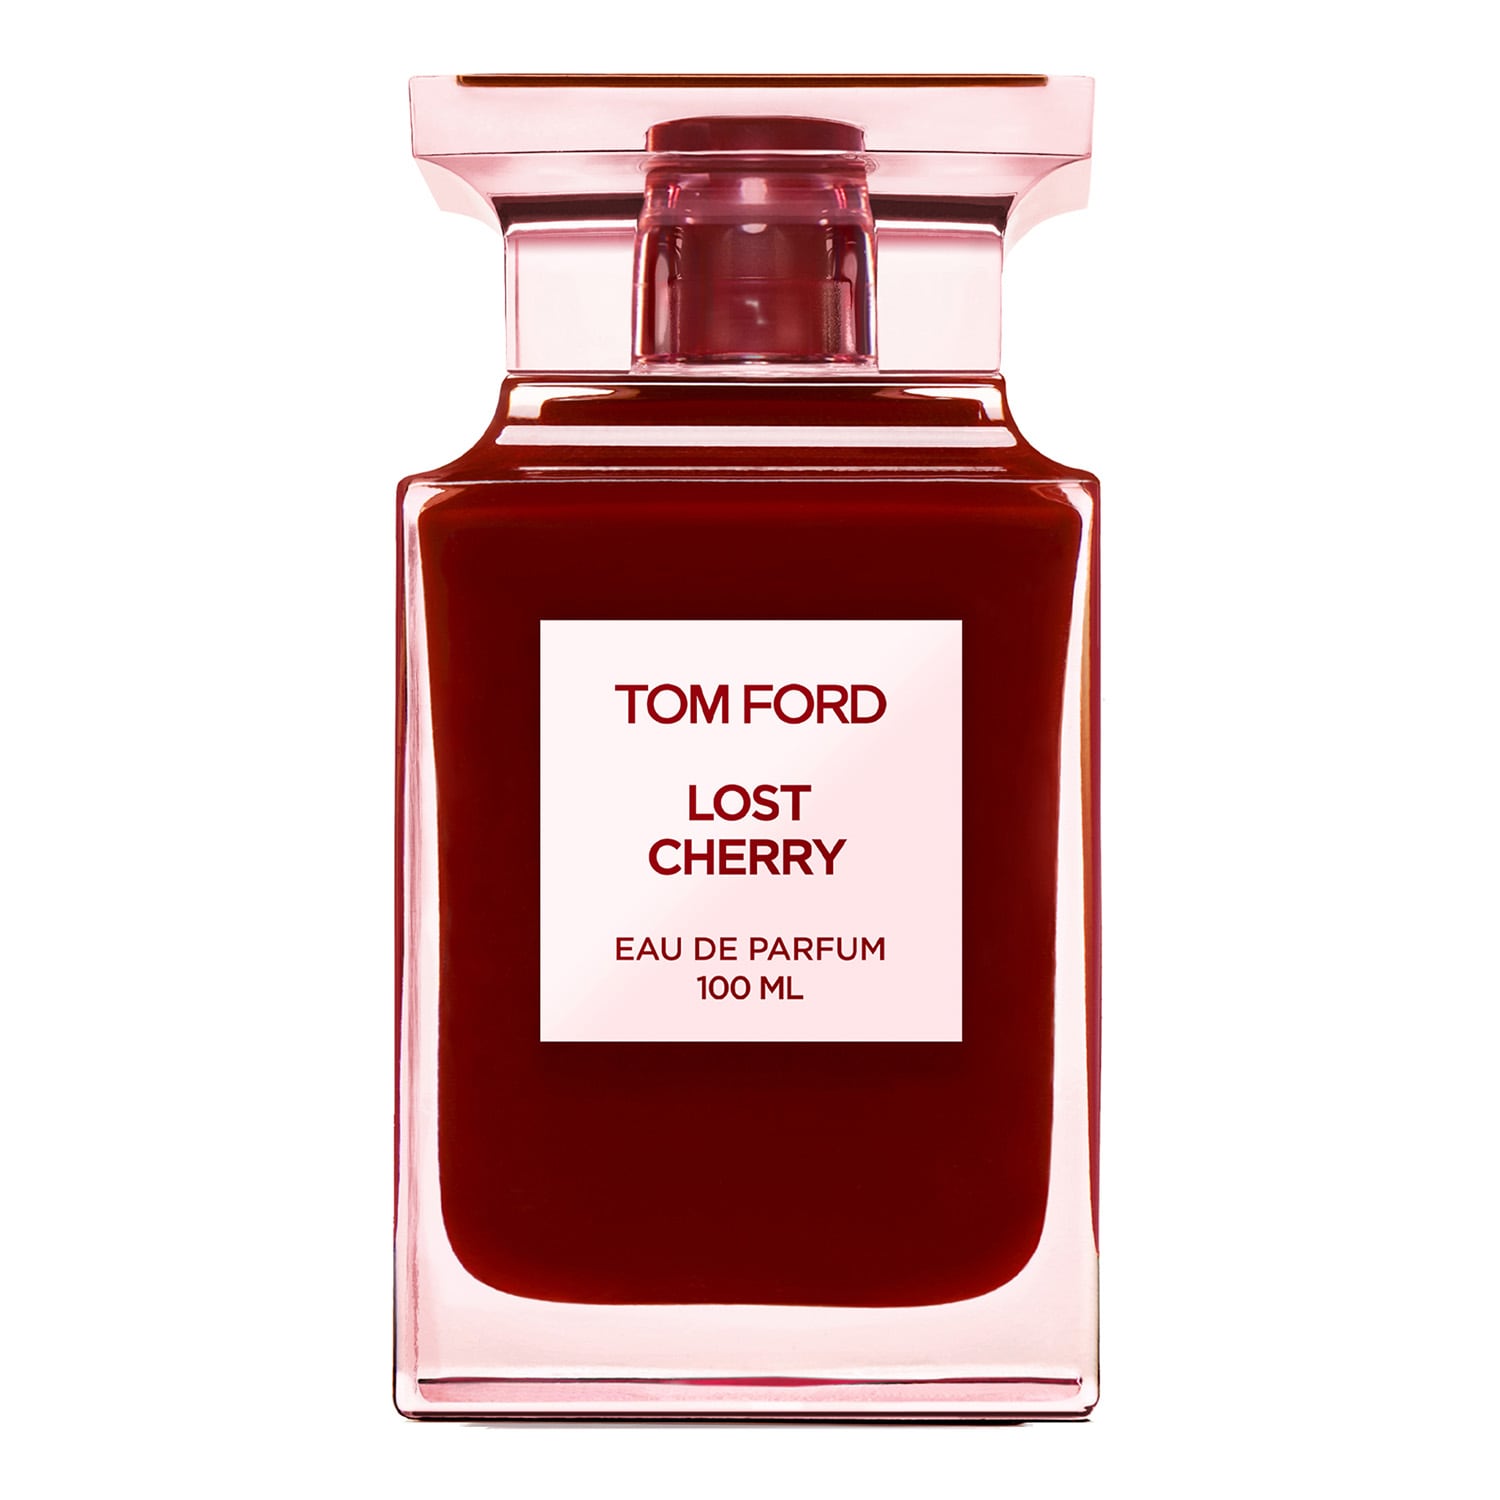 TOM FORD LOST CHERRY – ANAIS